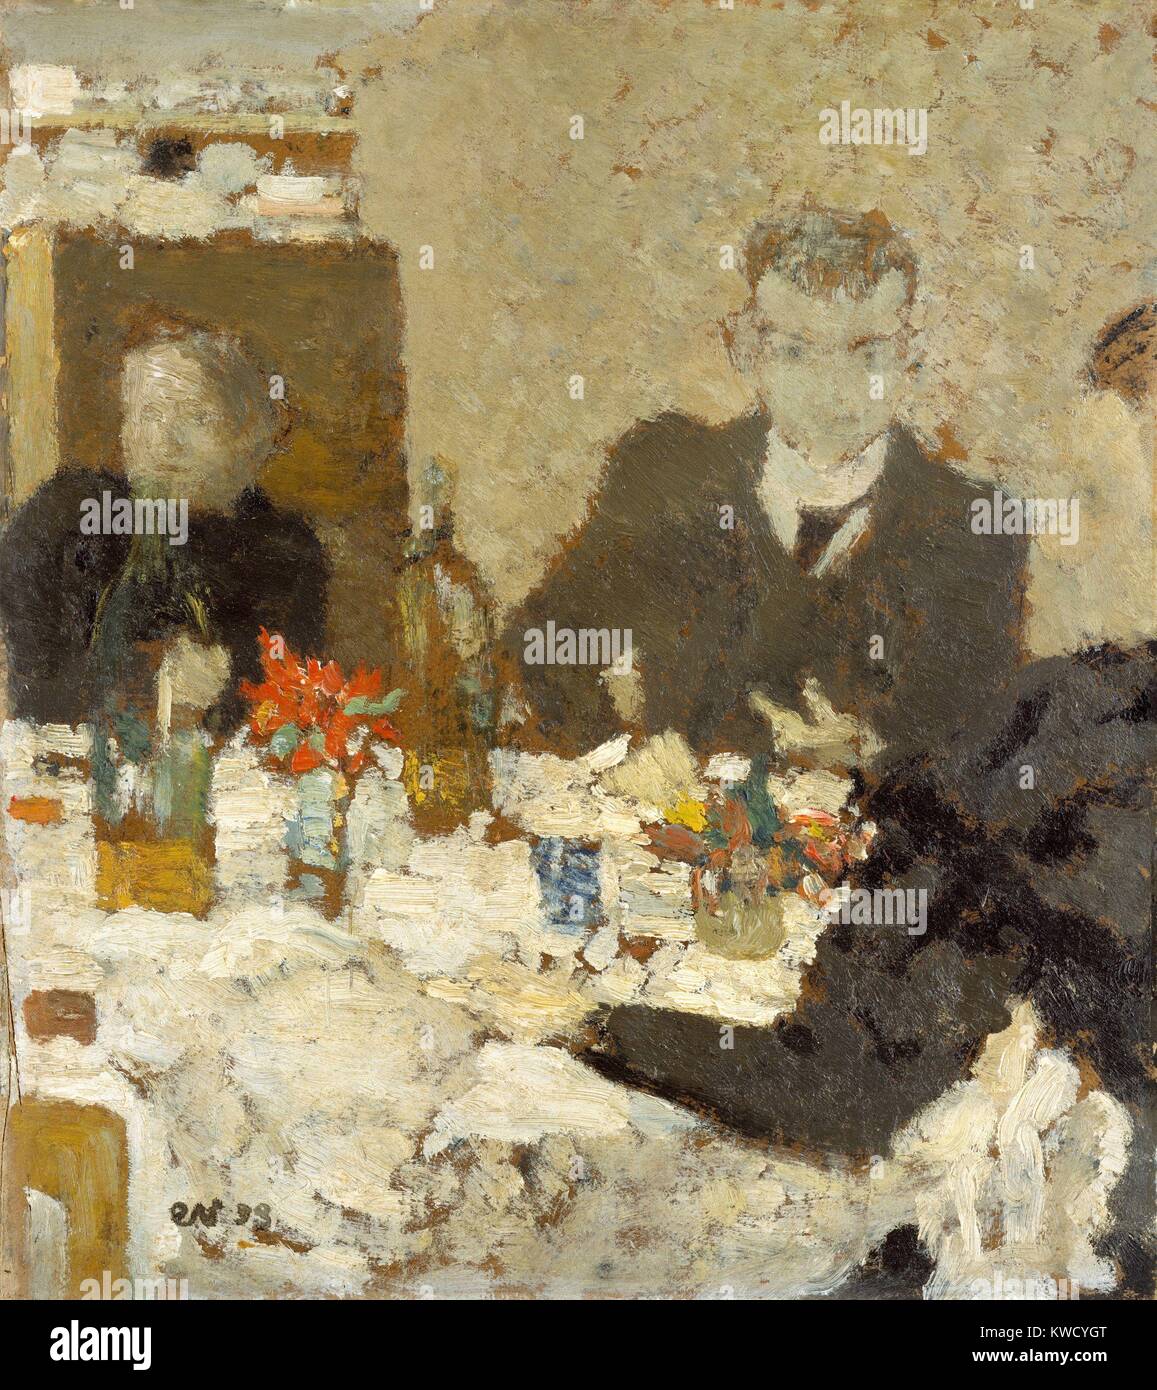 At Table, by Edouard Vuillard, 1893, French Post-Impressionist, oil painting on cardboard. This small picture of 12 x 10 inches, depicts an interior with three indistinctly painted figures dining (BSLOC 2017 5 98) Stock Photo